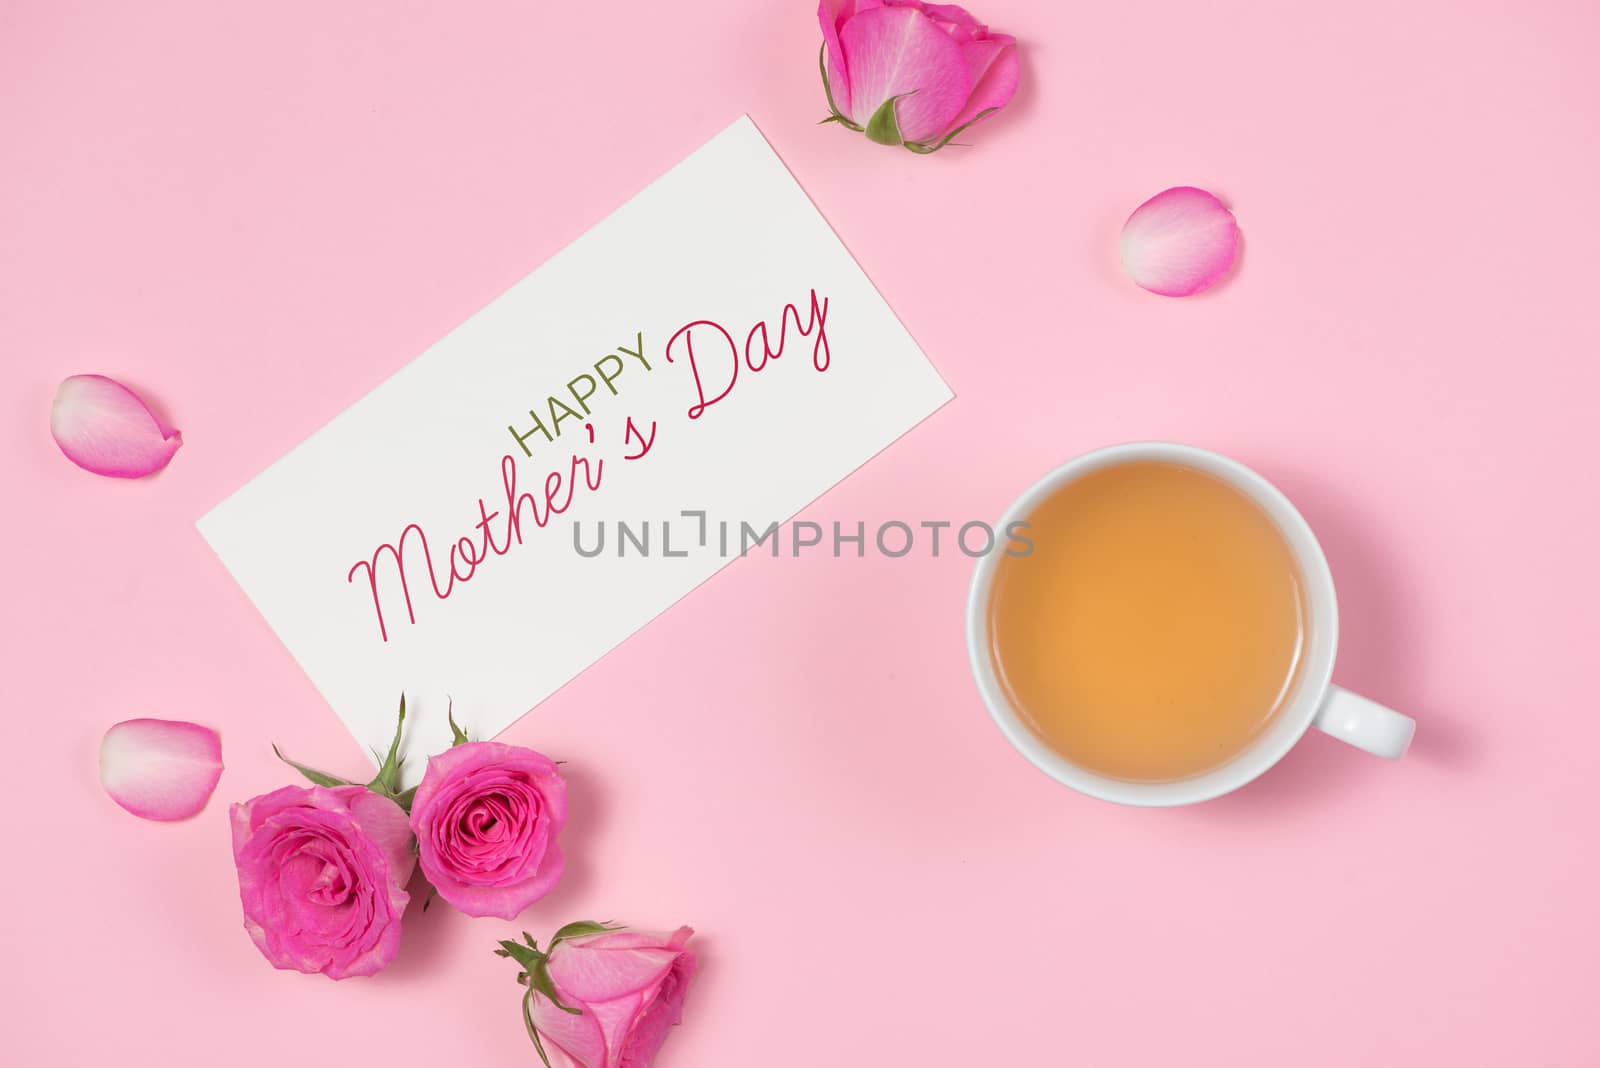 Womans Day greeting card with rose flowers over wooden background. Top view with copy space